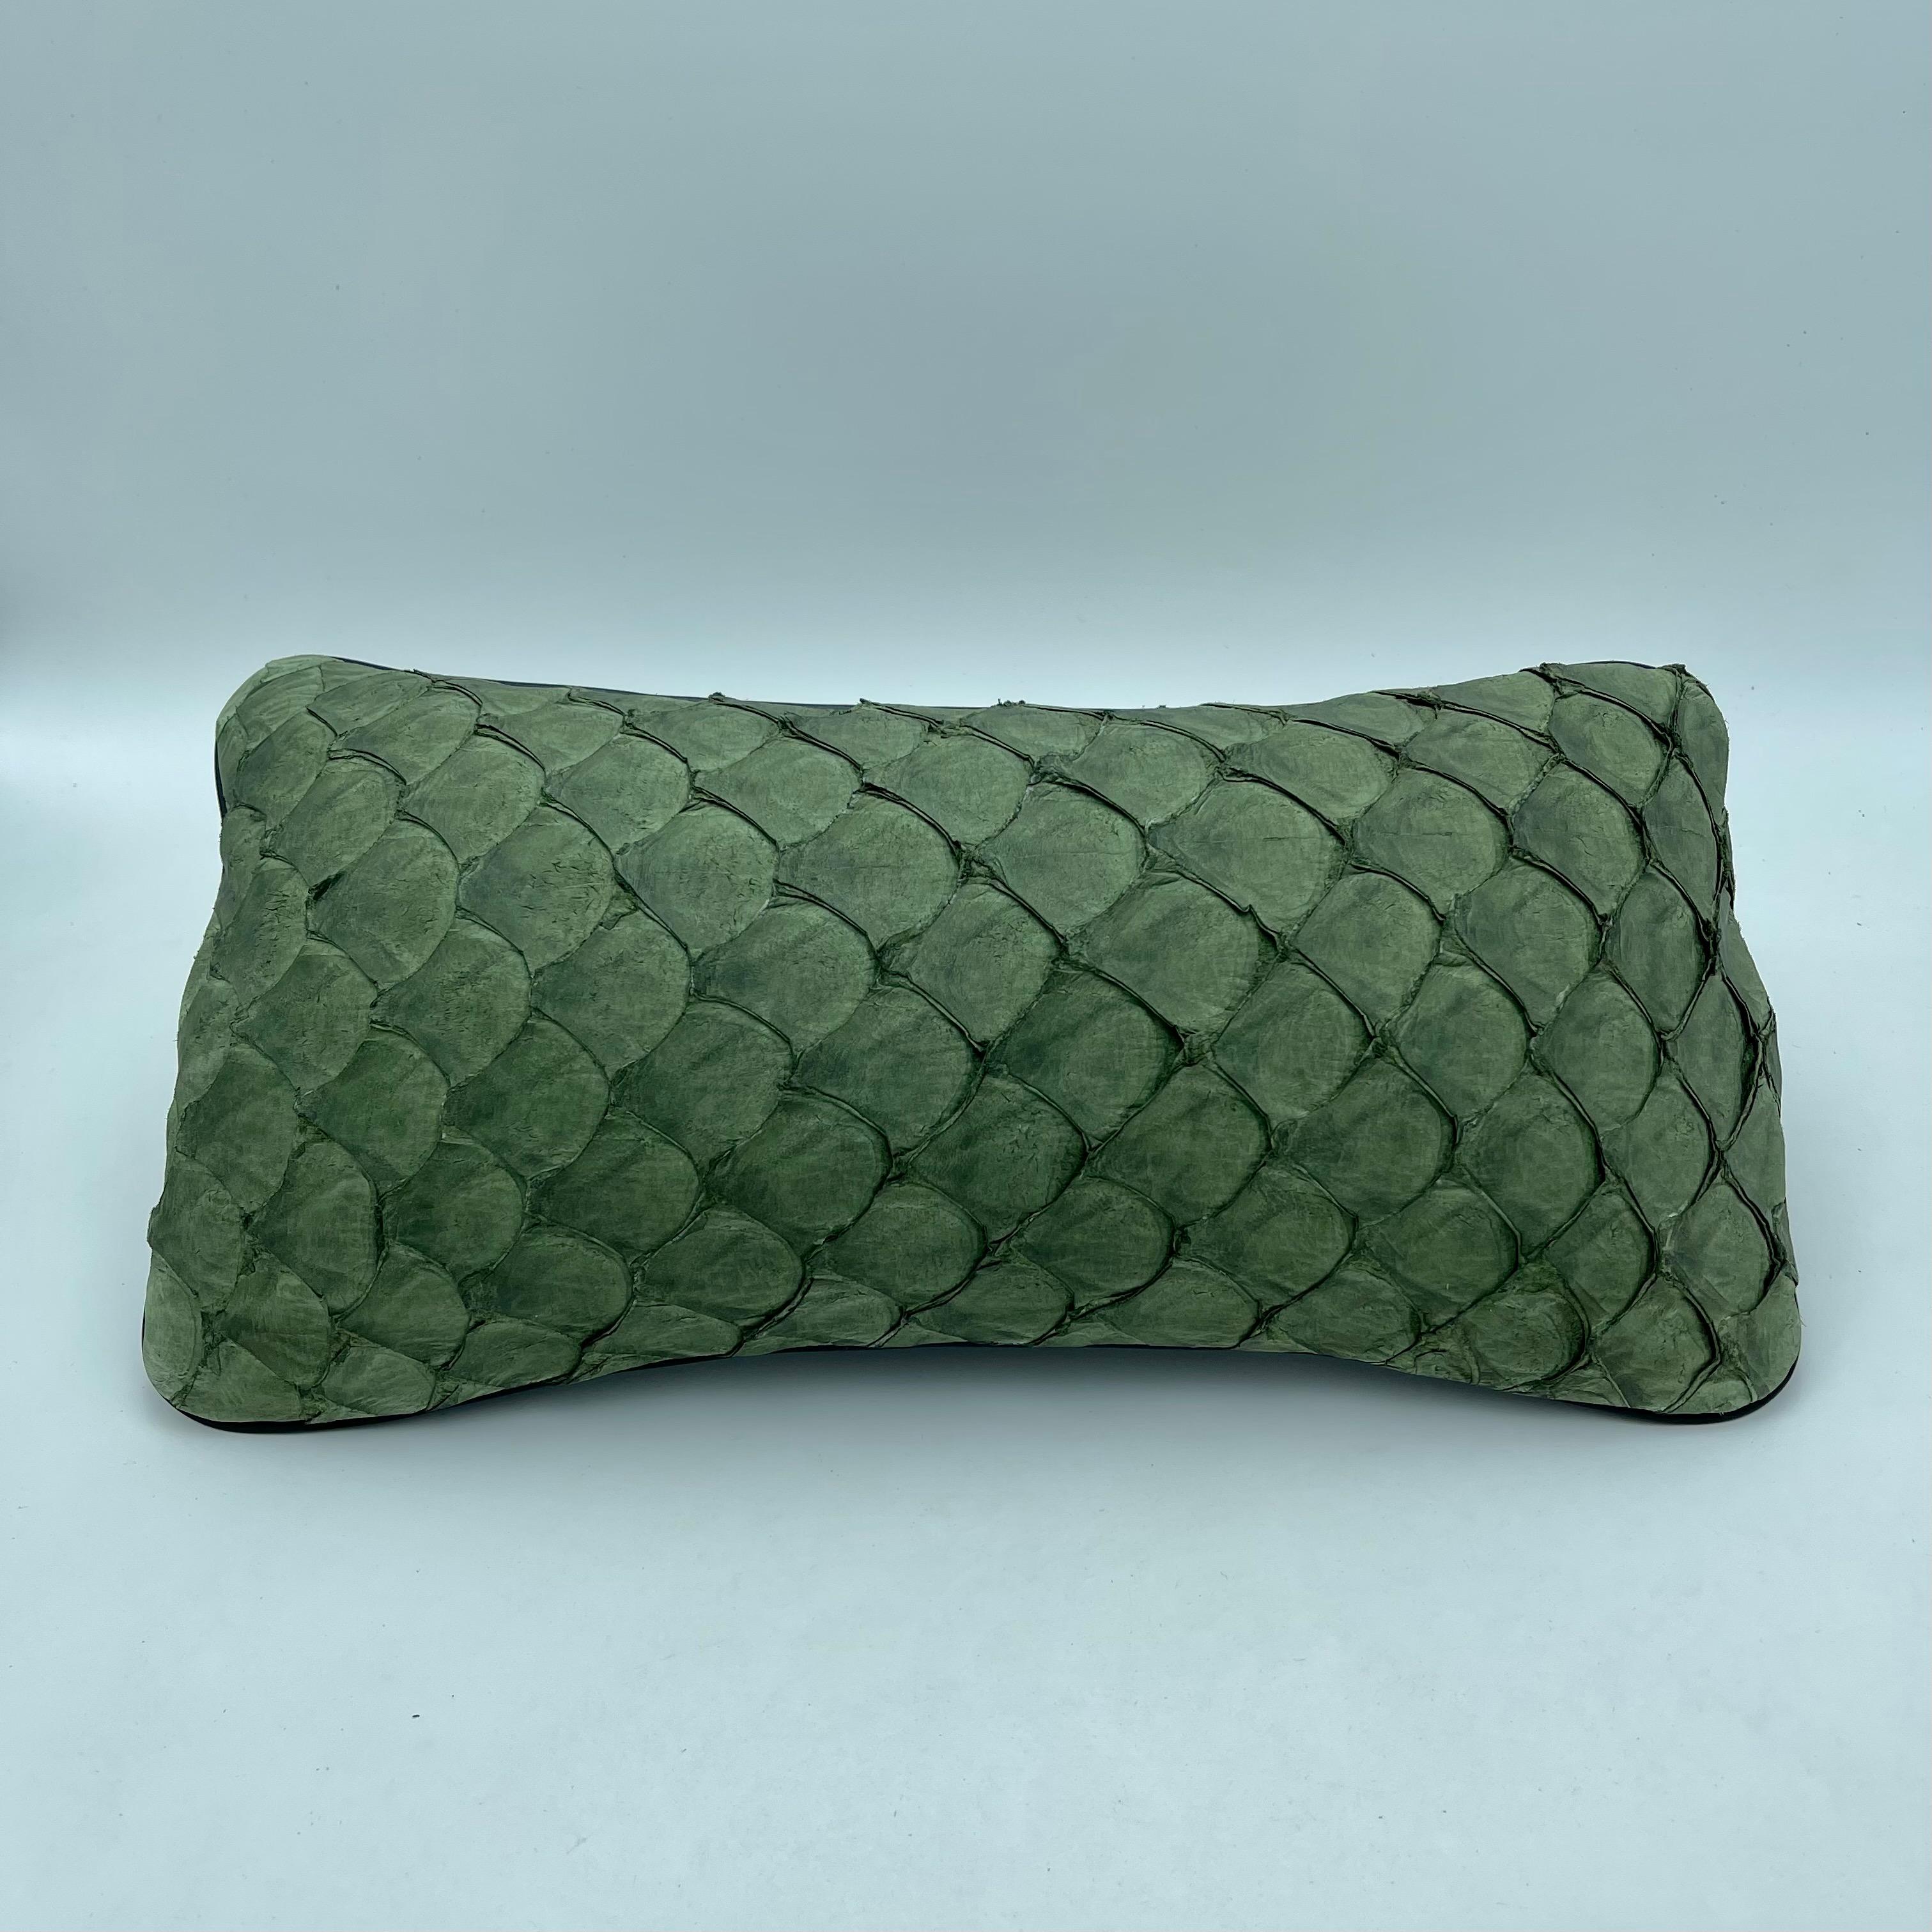 Spanish Set of 2 Leather Cushion, Exclusive Fish Leather, Green Color, Small Size For Sale